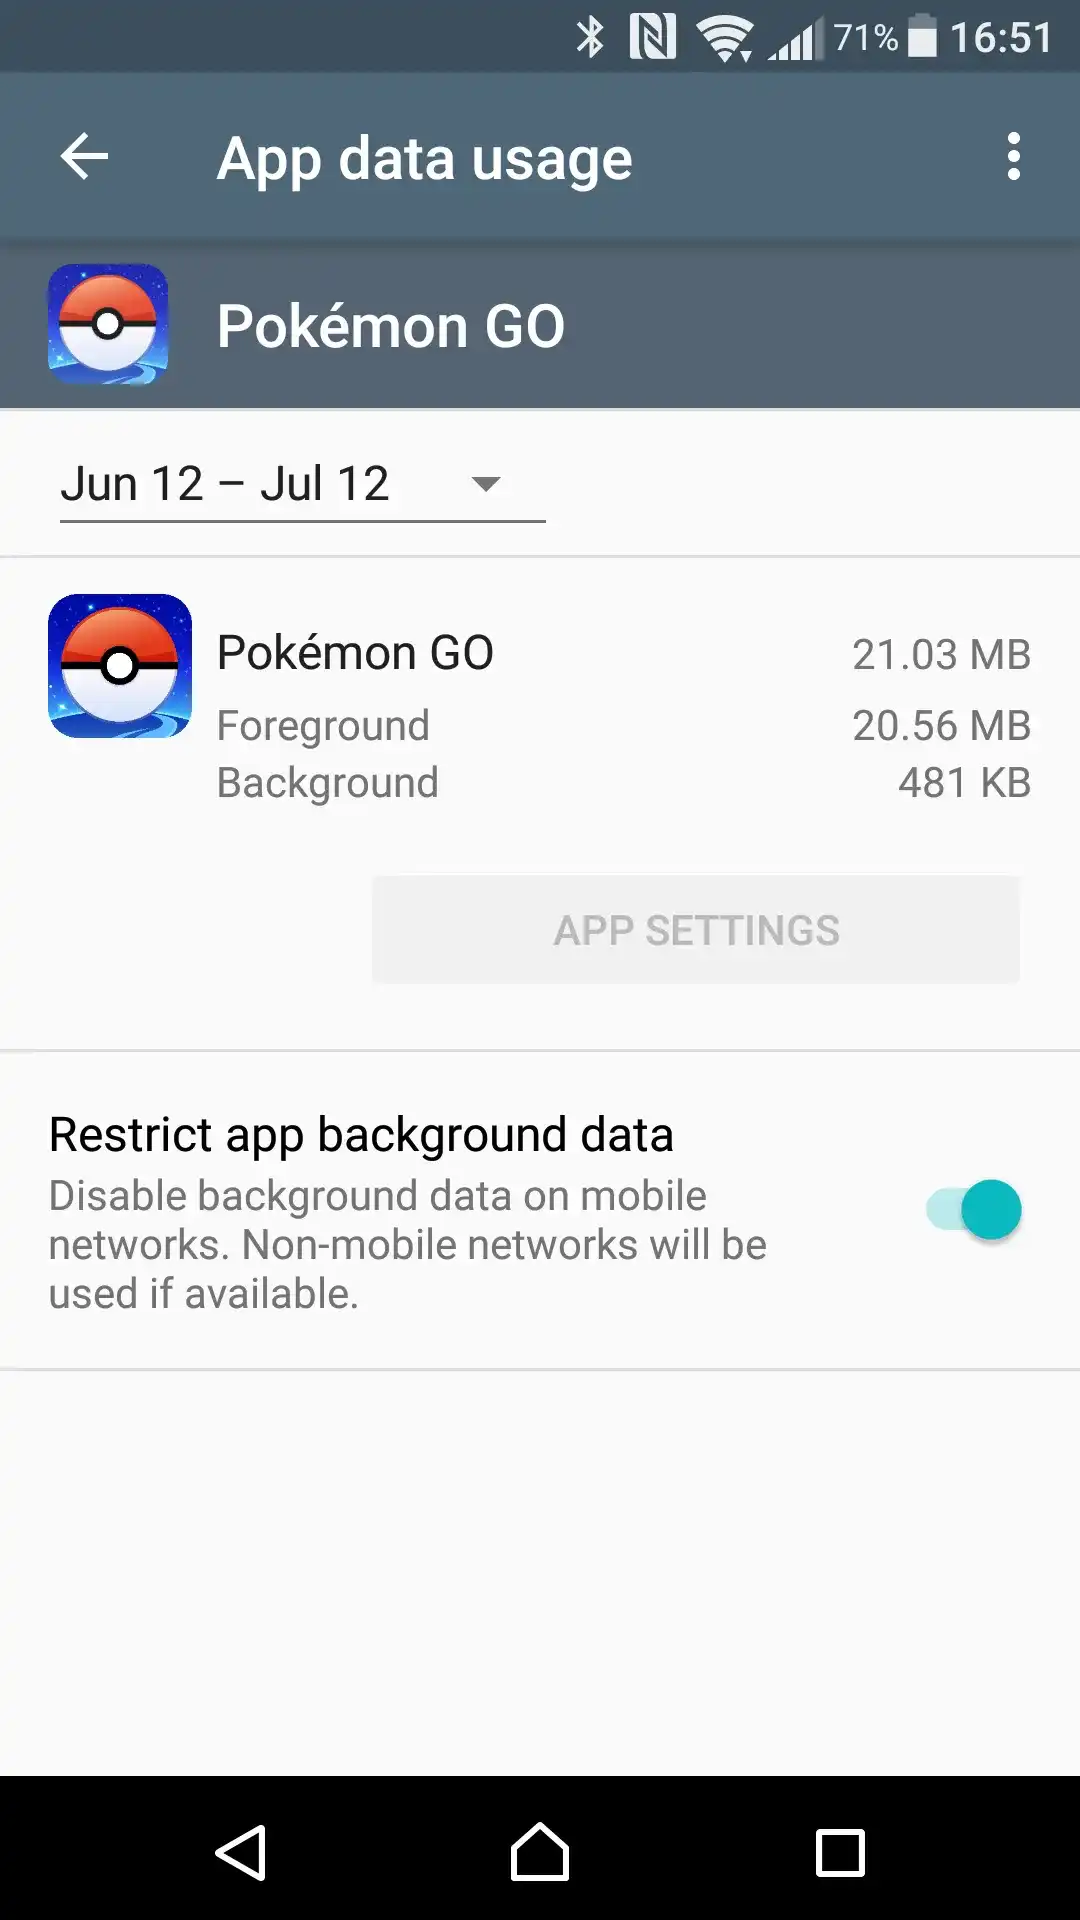 How much mobile data does Pokémon Go use?